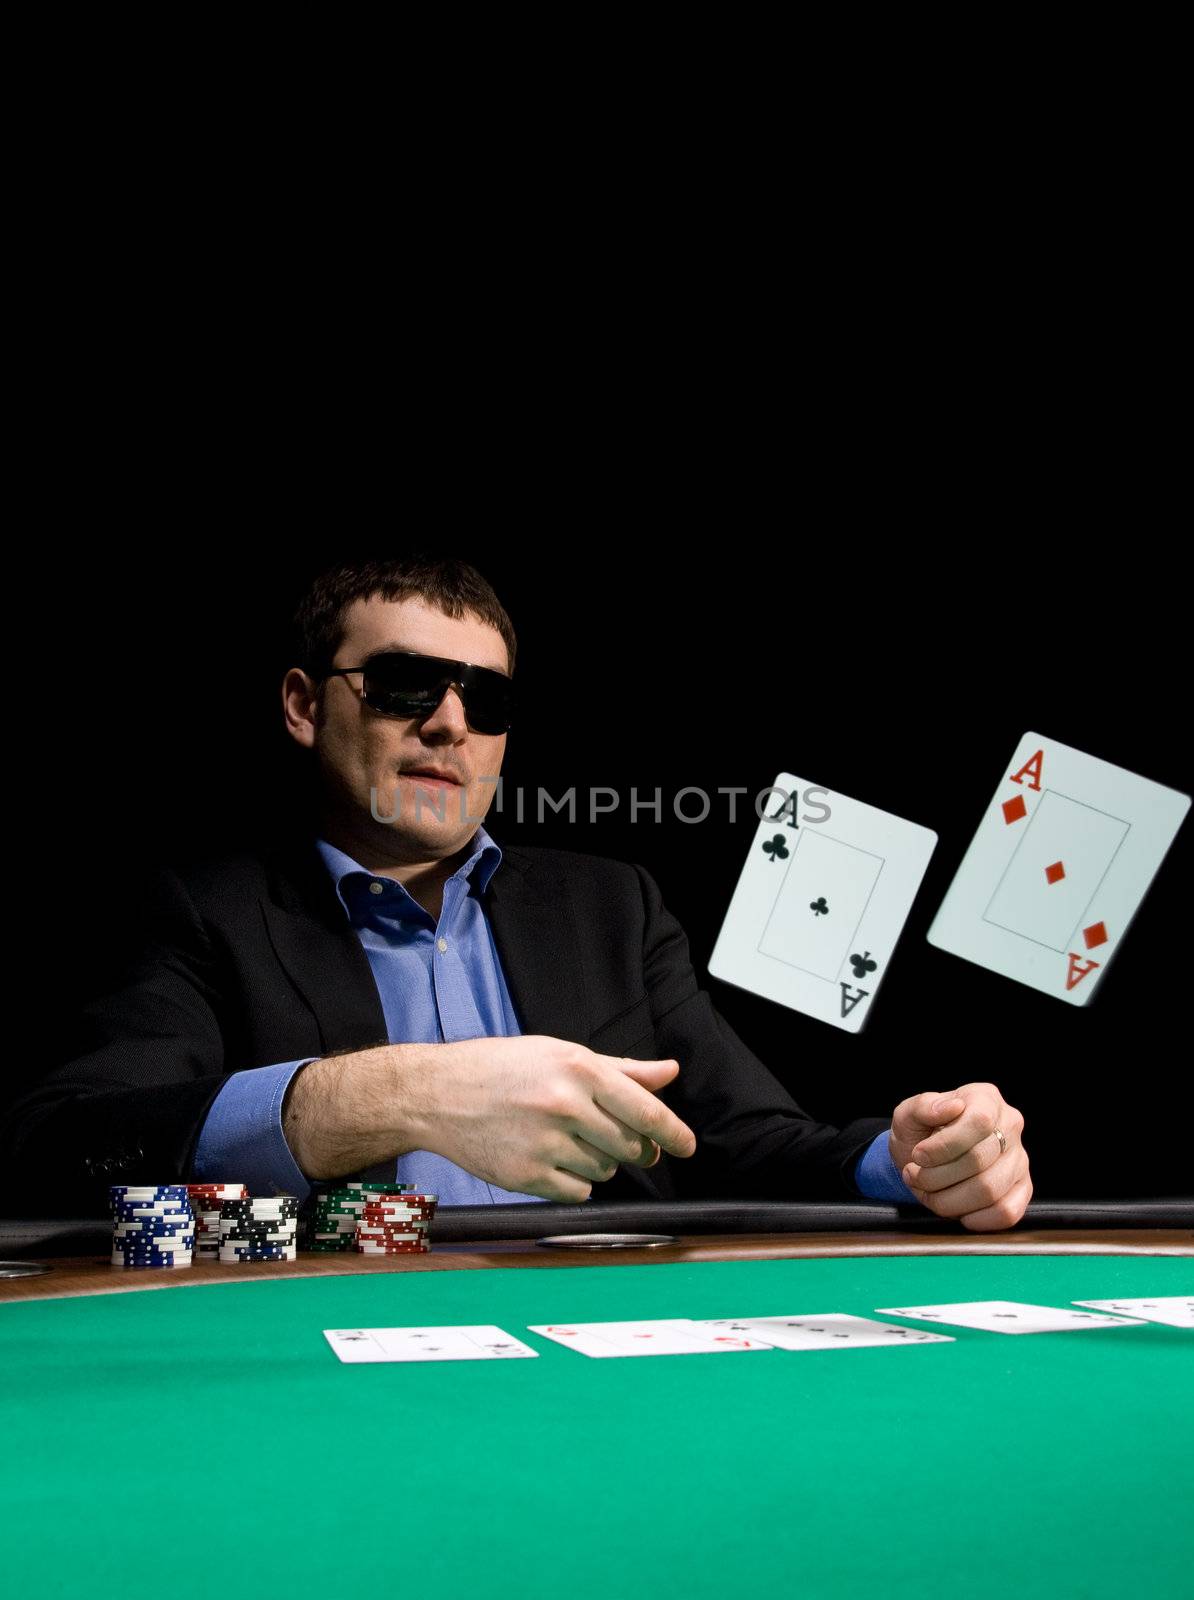 Fold in poker with two aces by alex_garaev